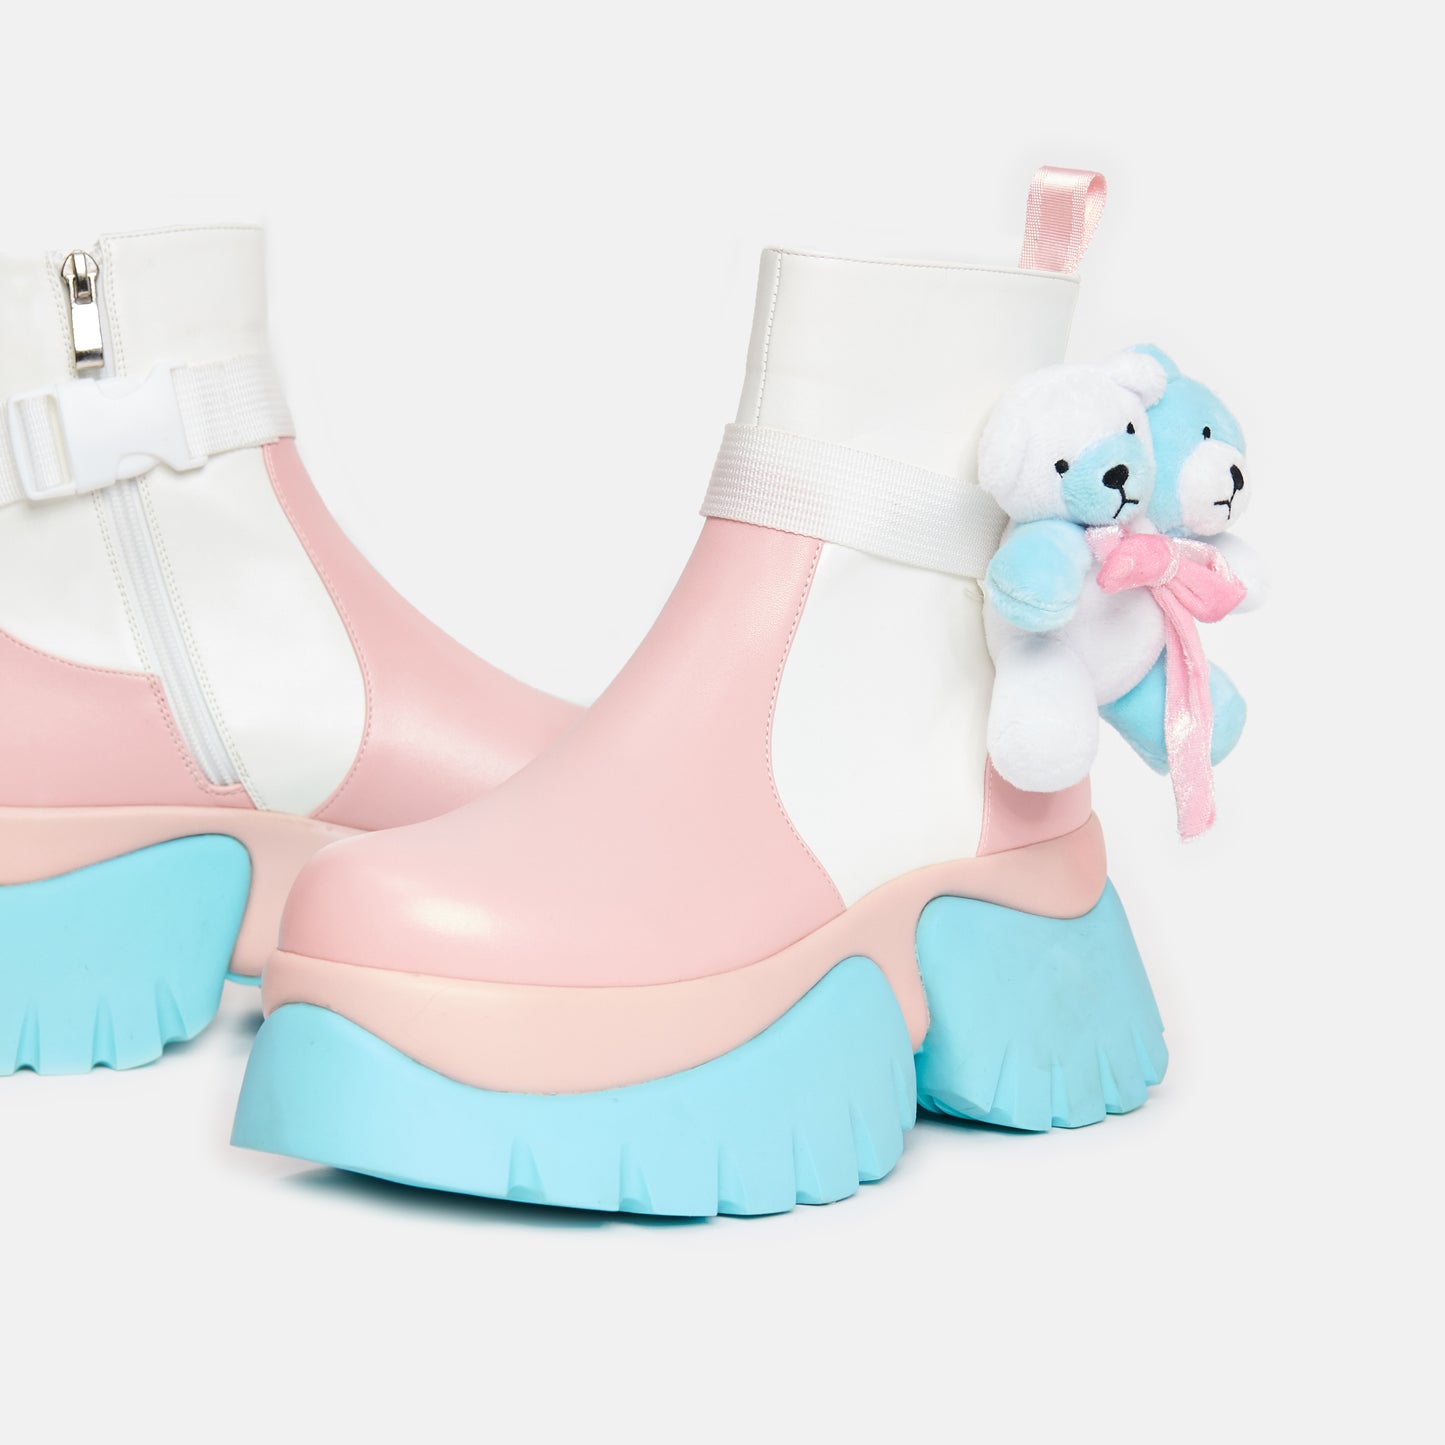 Teddy Bear Pastel Platform Boots - Ankle Boots - KOI Footwear - Multi - Close-Up Detail